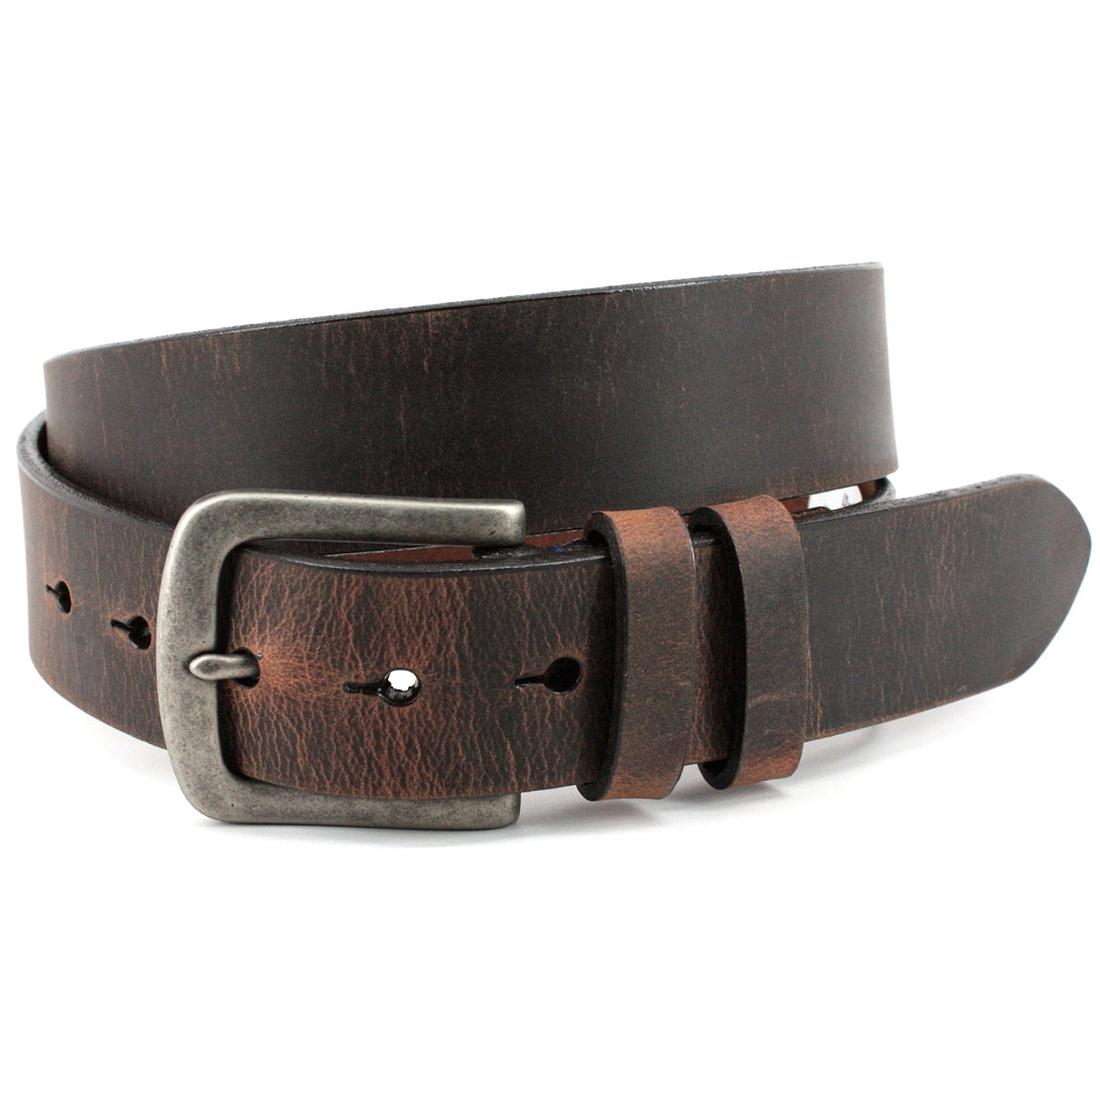  Distressed Waxed Leather Belt Brown